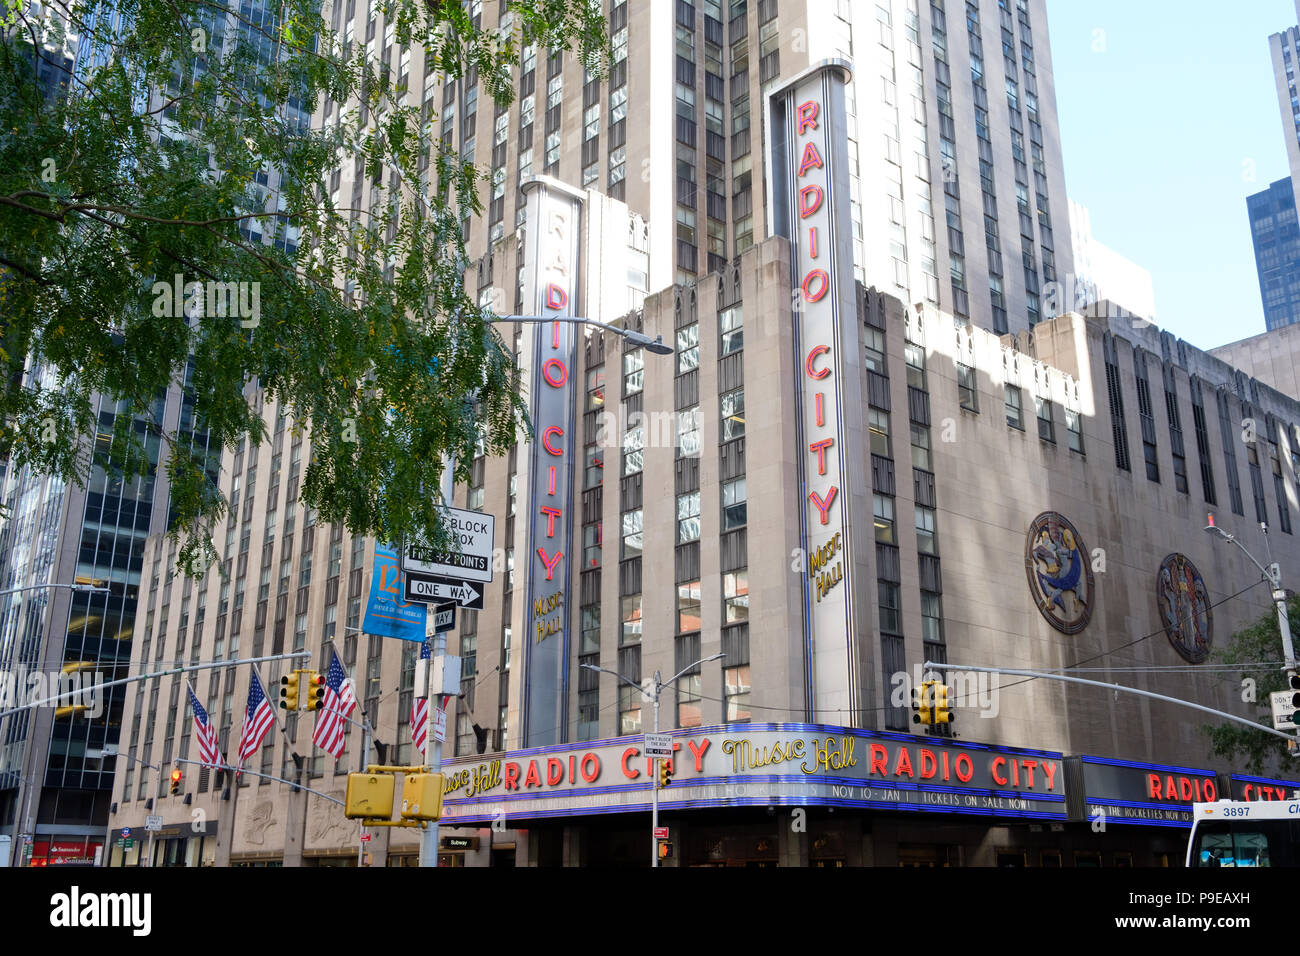 Outside view of Radio city music hall in New York USA Stock Photo